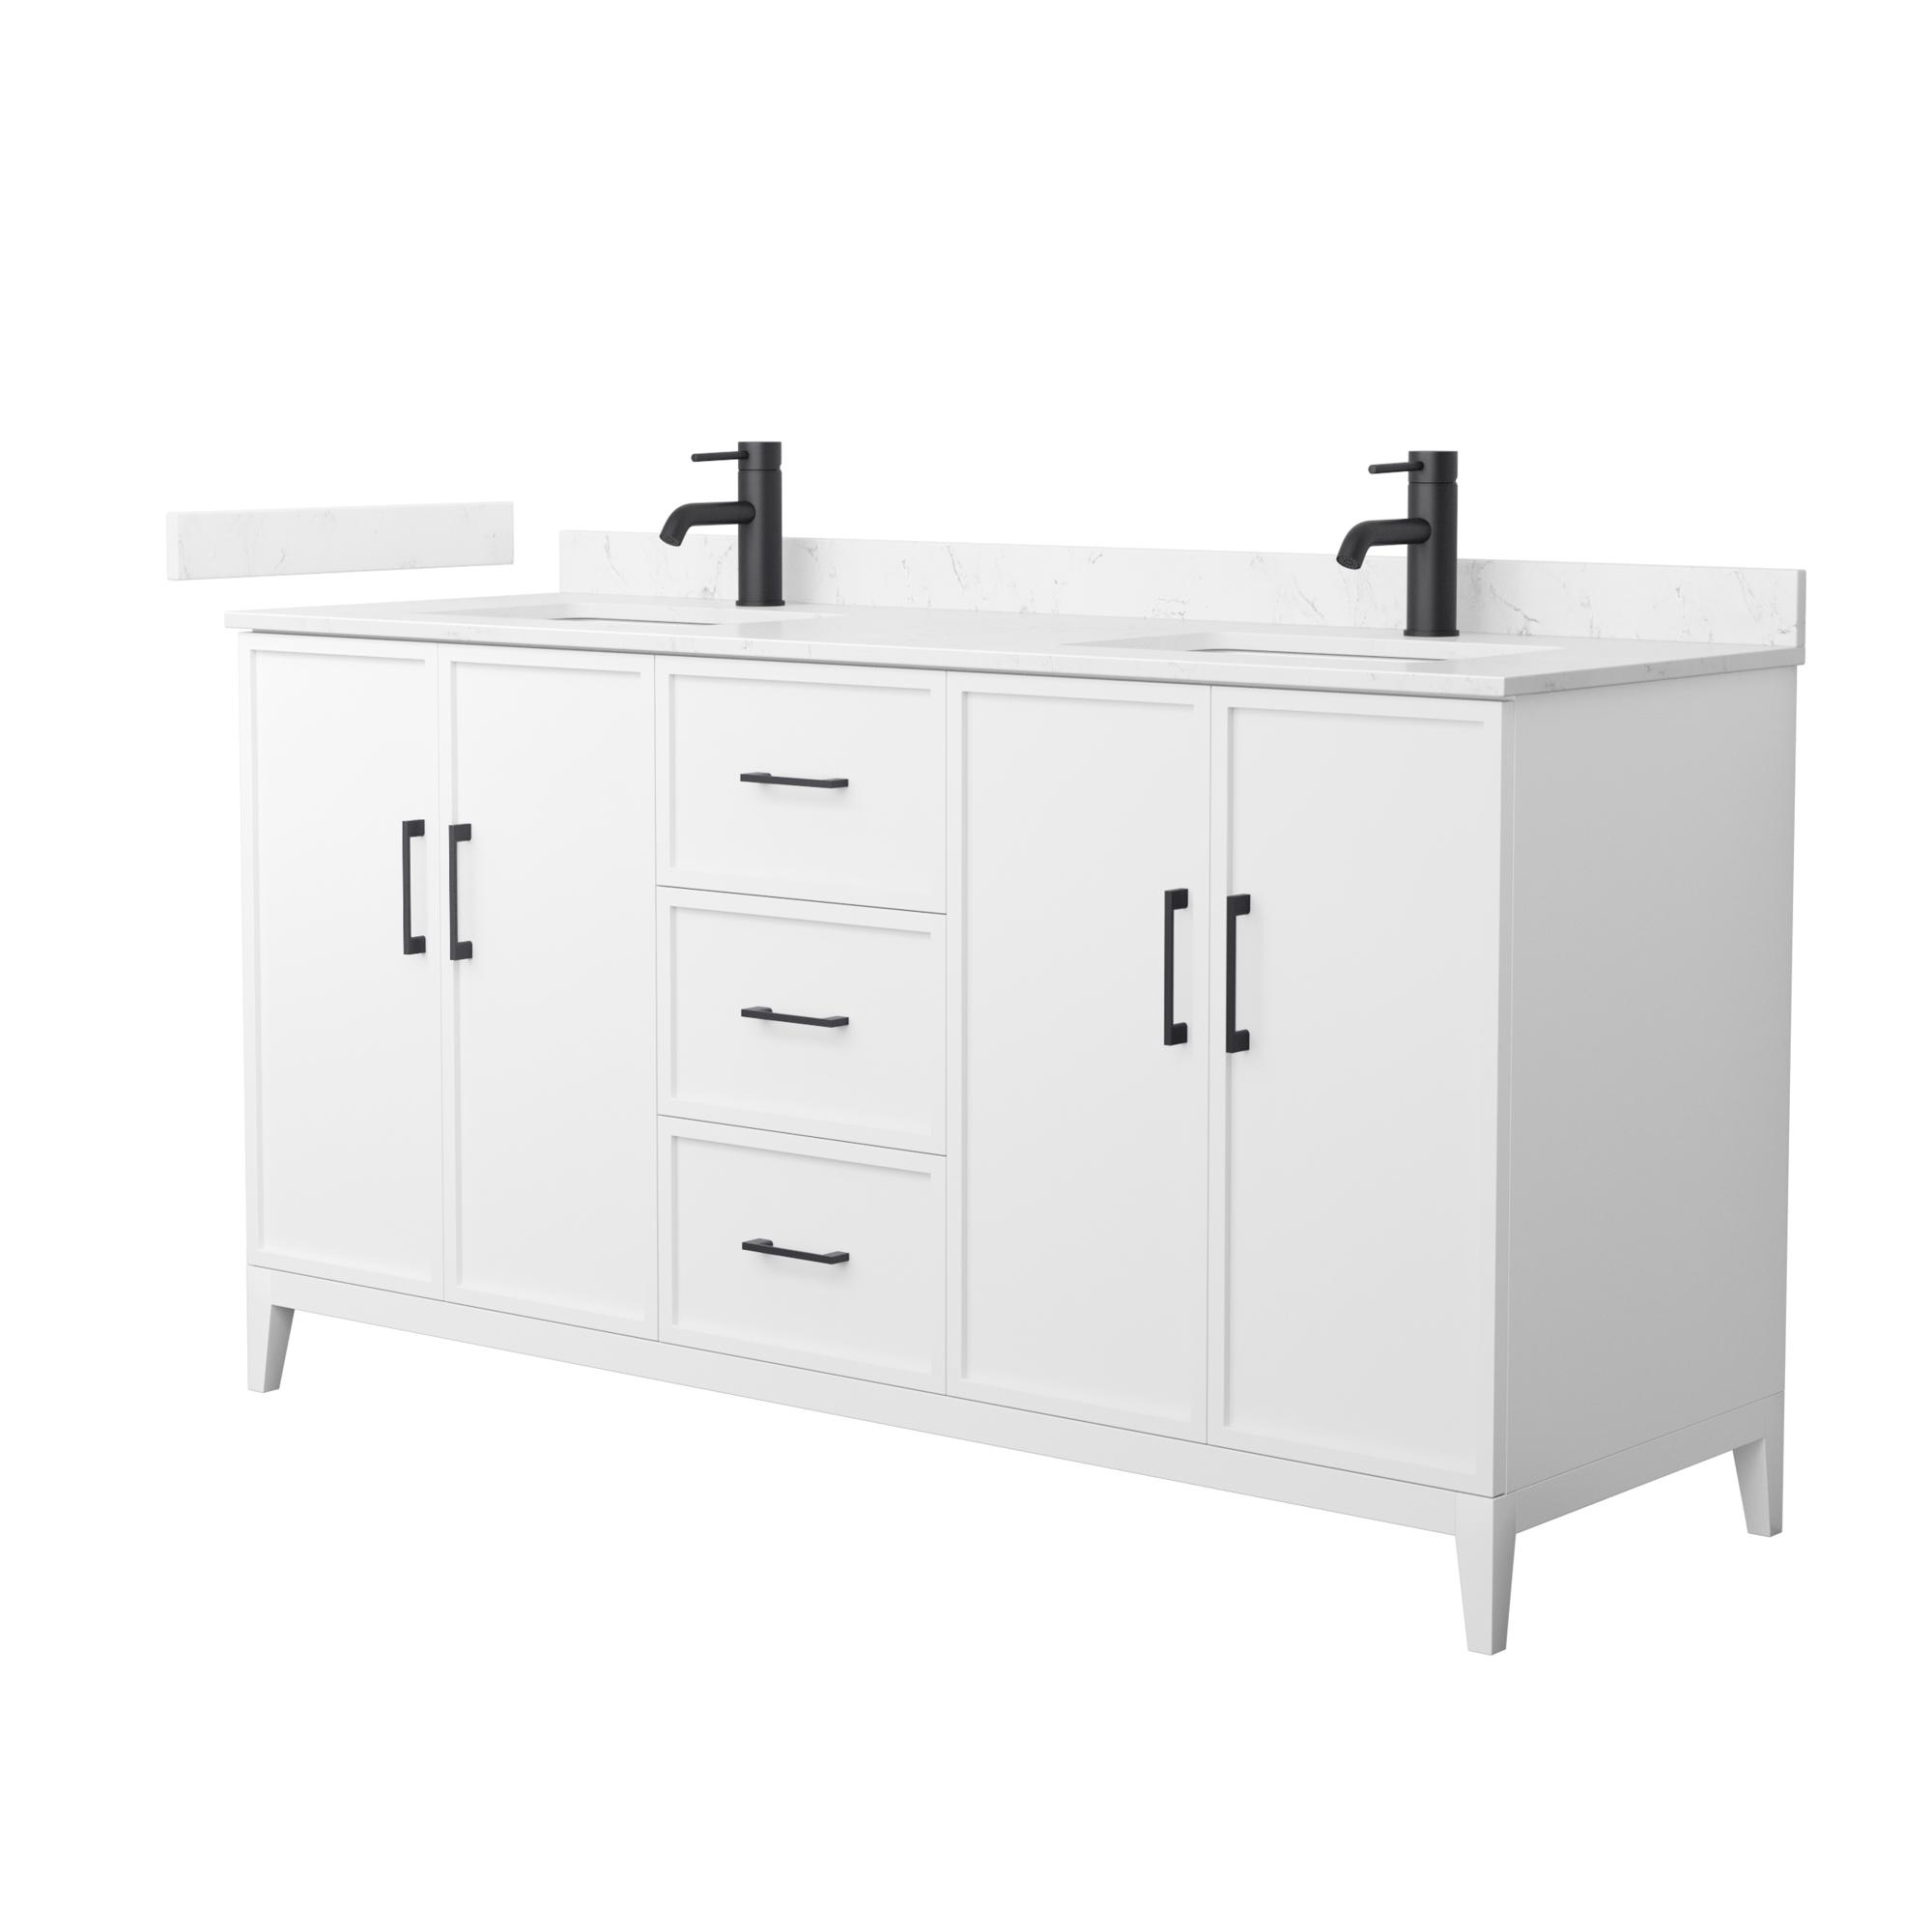 66" Transitional Double Vanity Base in White, 7 Top Options with 2 Hardware Option